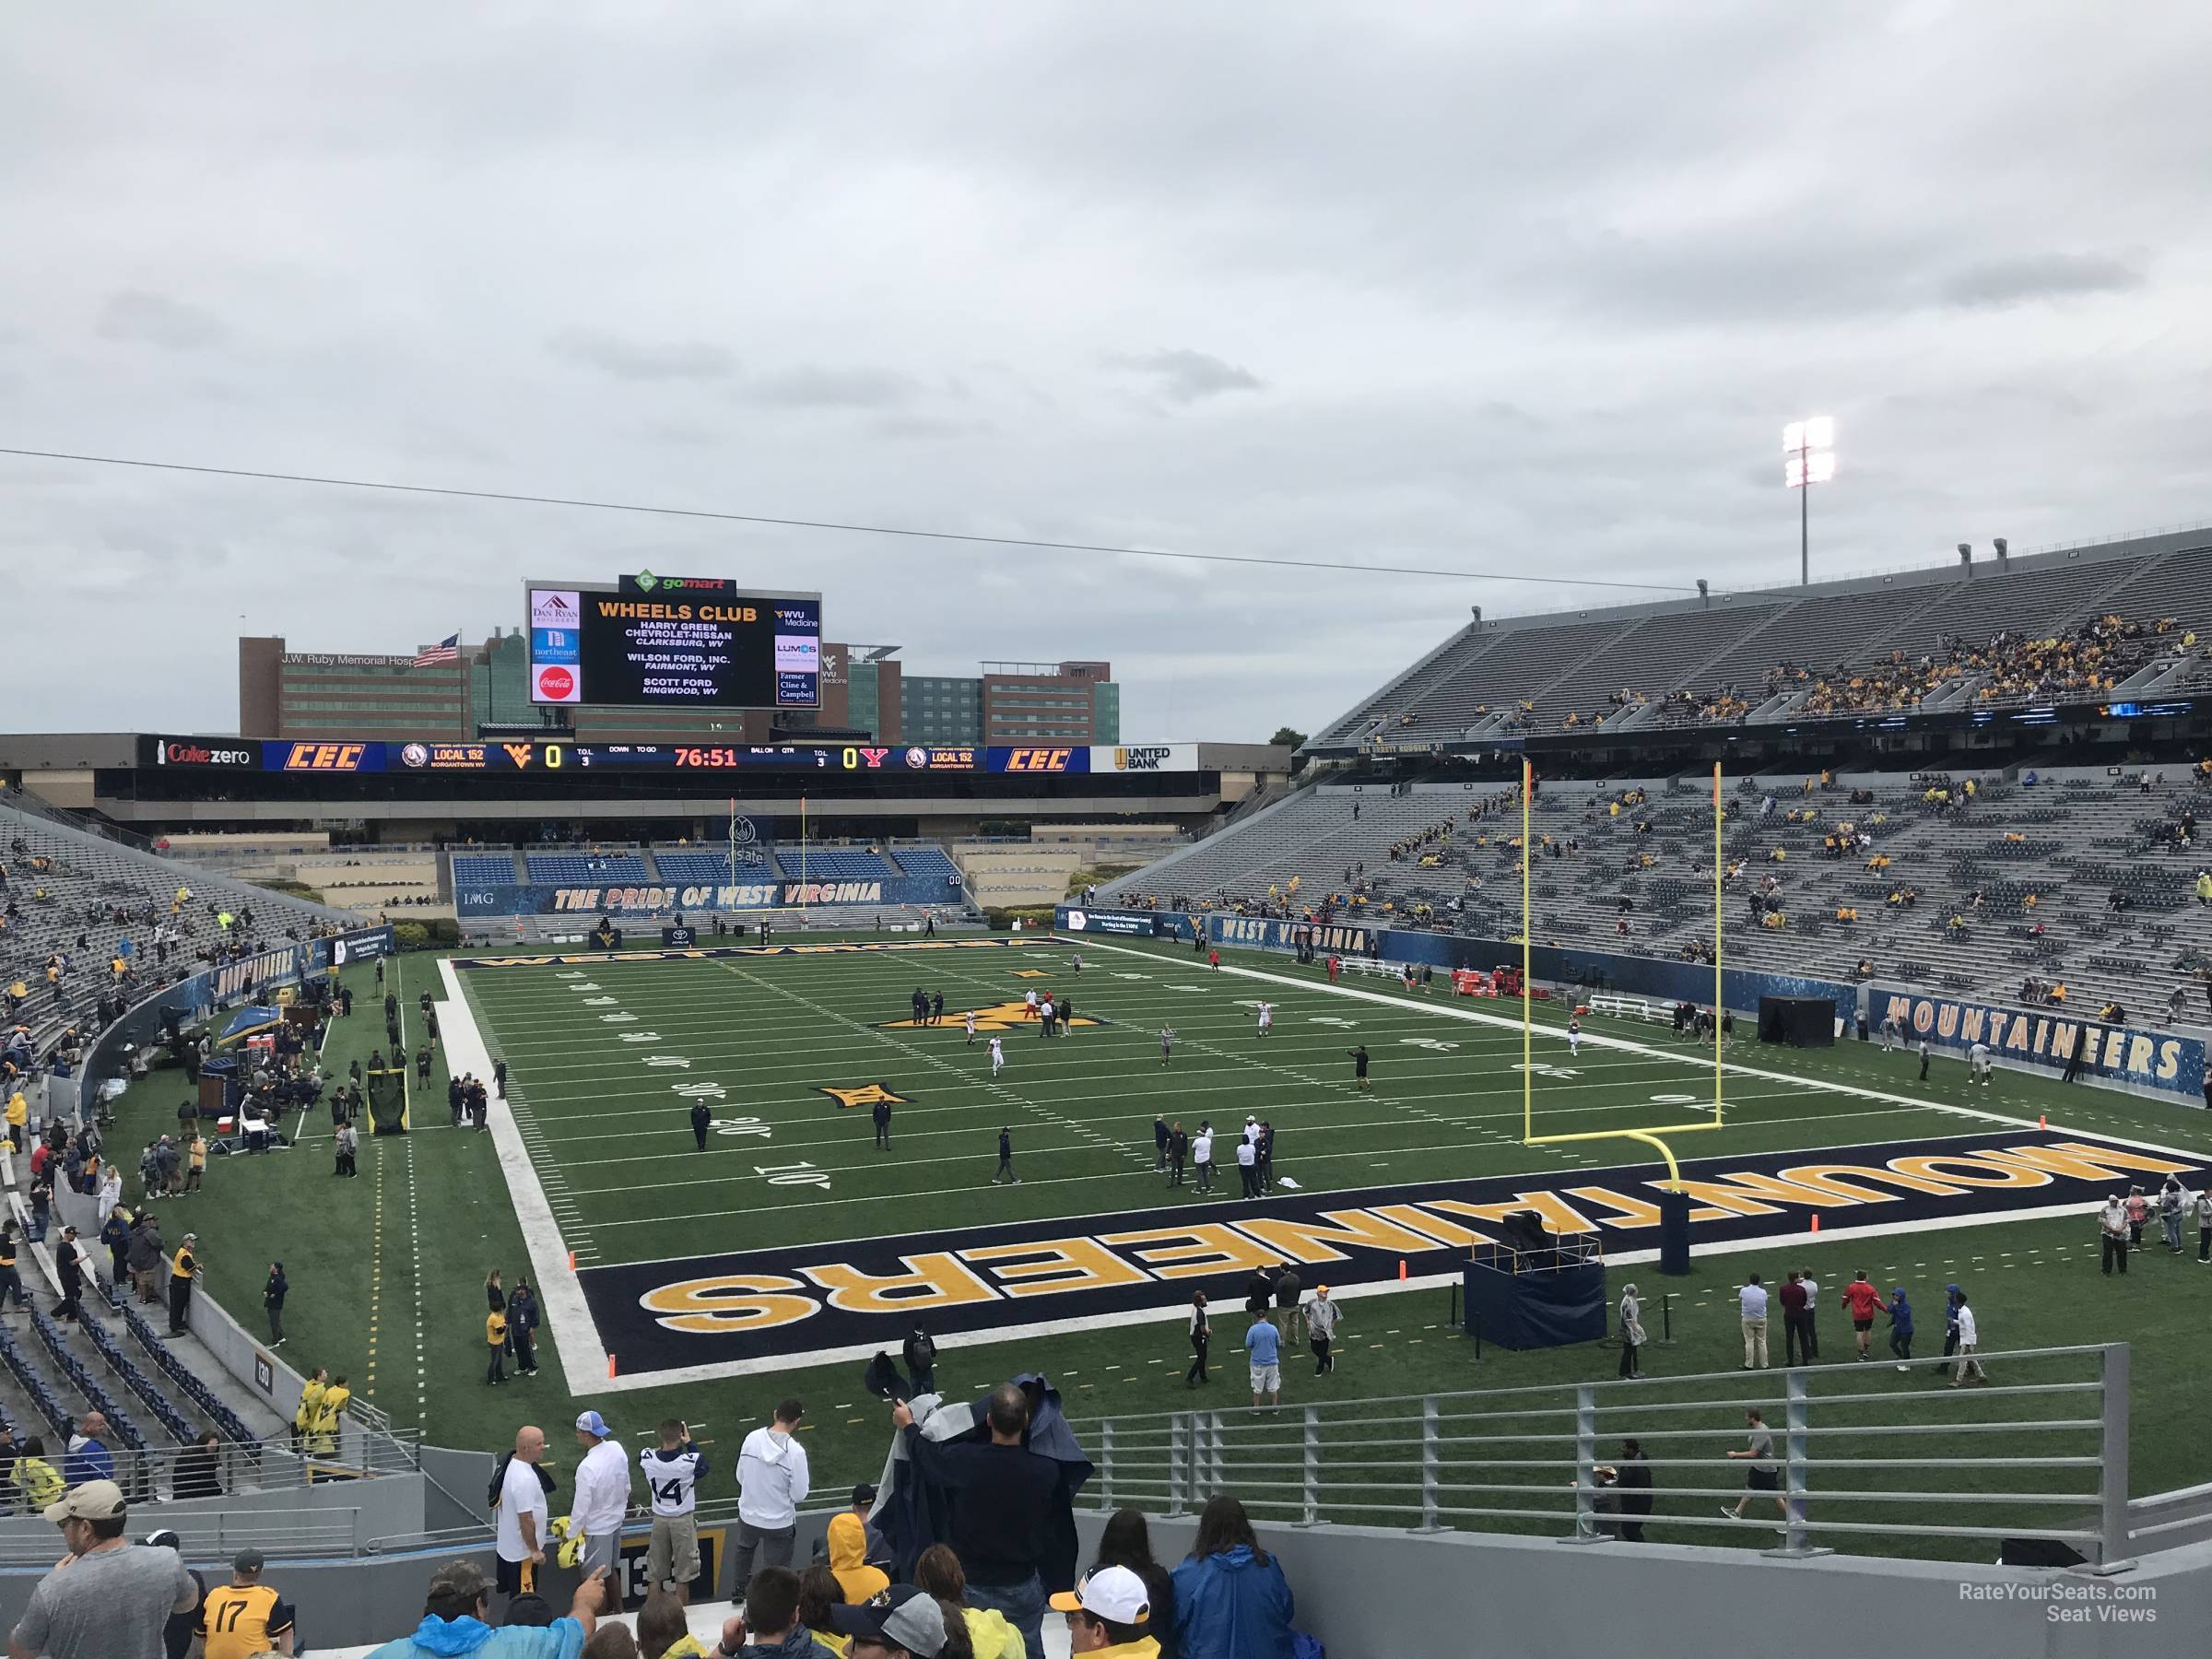 section 133, row 35 seat view  - mountaineer field